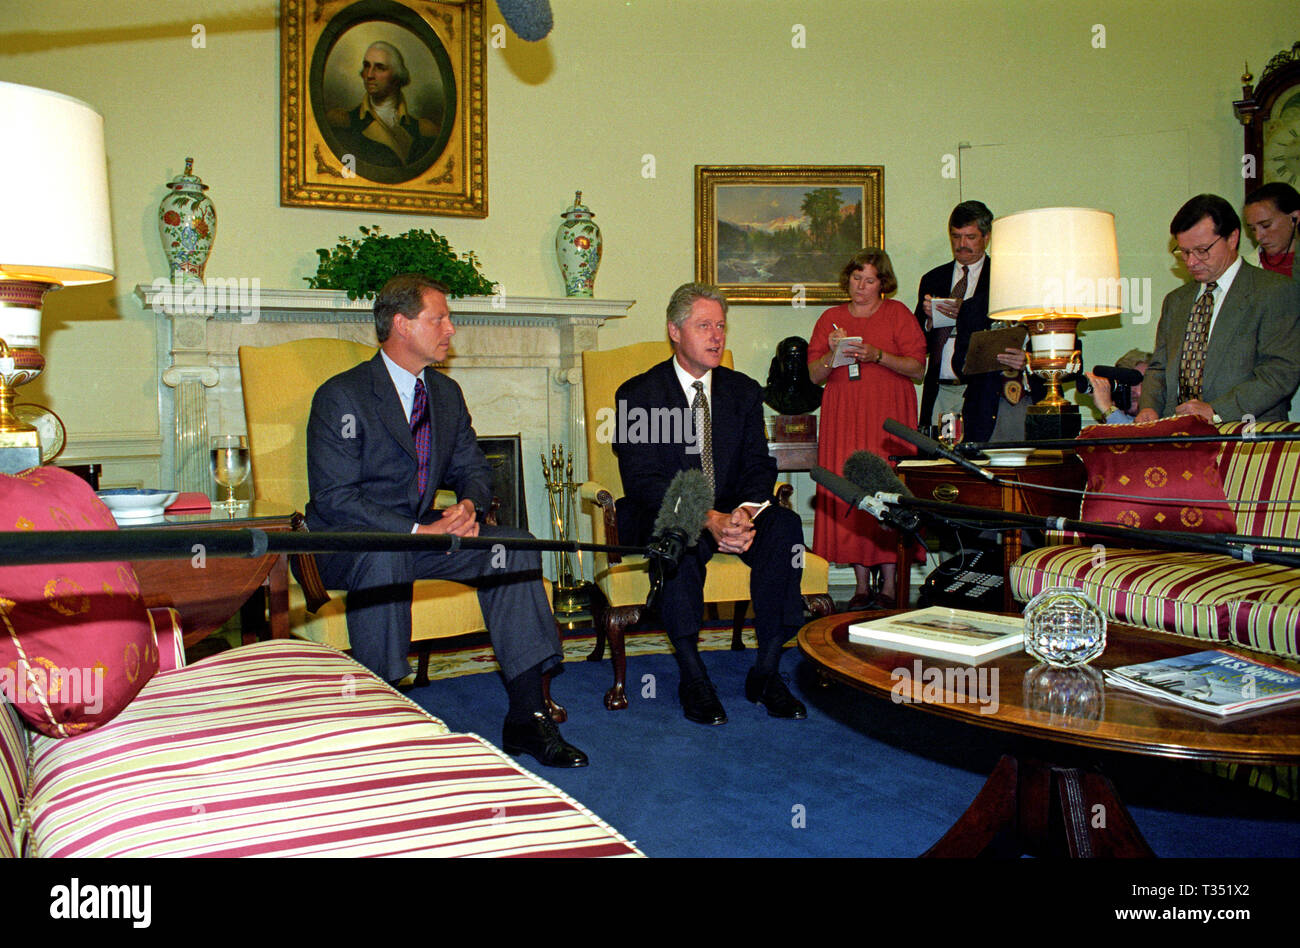 United States President Bill Clinton, right, and US Vice President Al Gore,  left, meet with reporters in the Oval Office of the White House in  Washington, DC to discuss the situation in